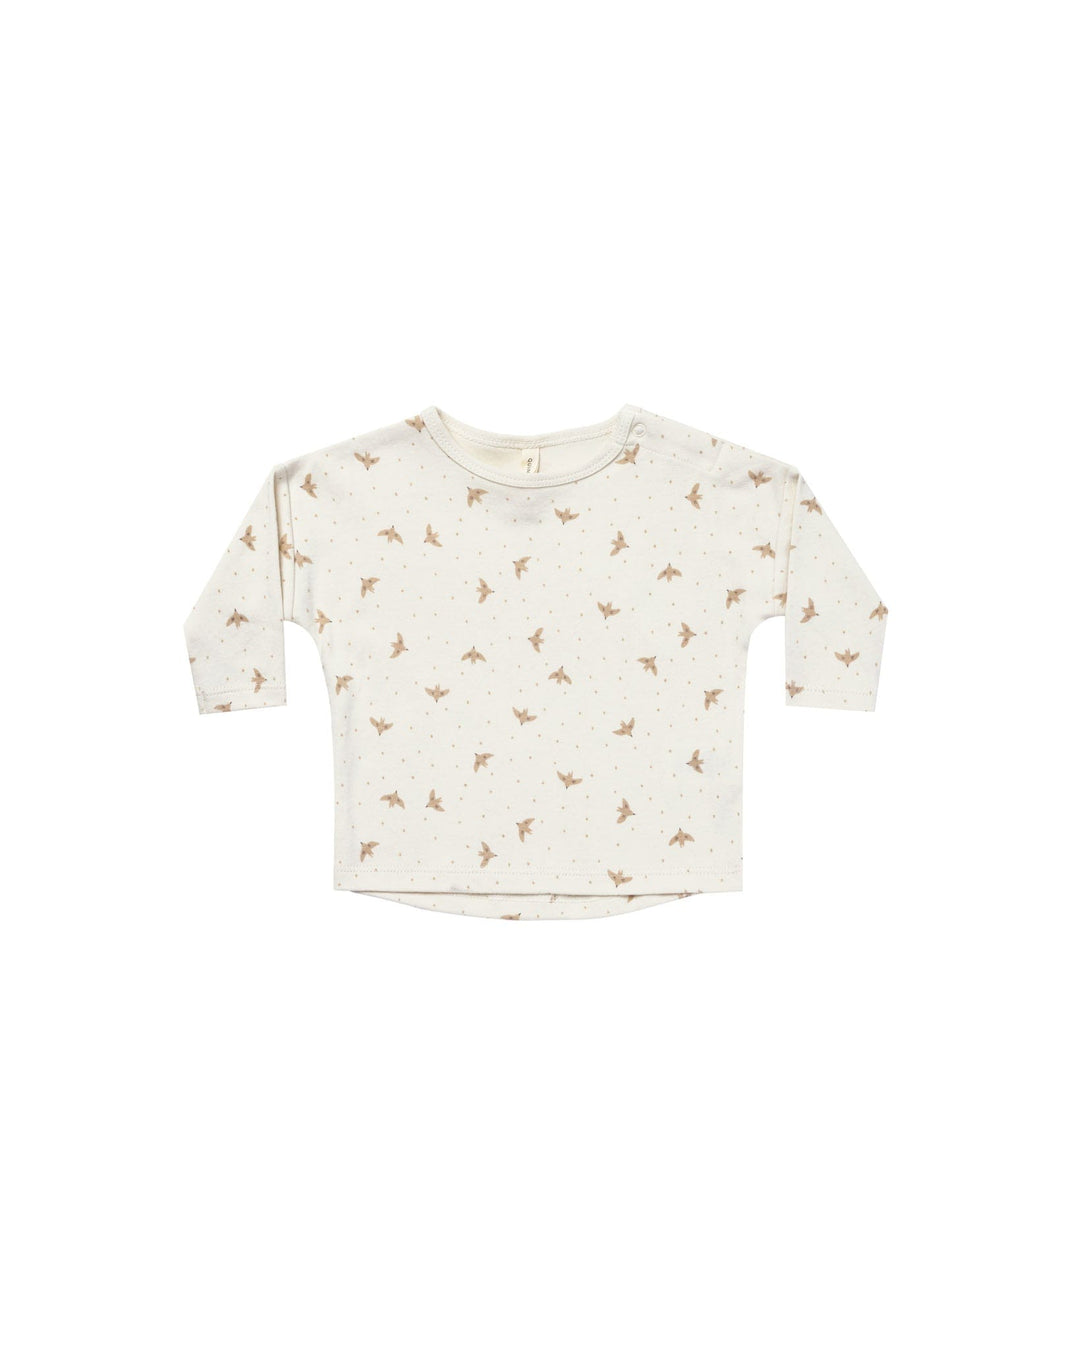 Quincy Mae Baby & Toddler Tops Long Sleeve Tee - Doves